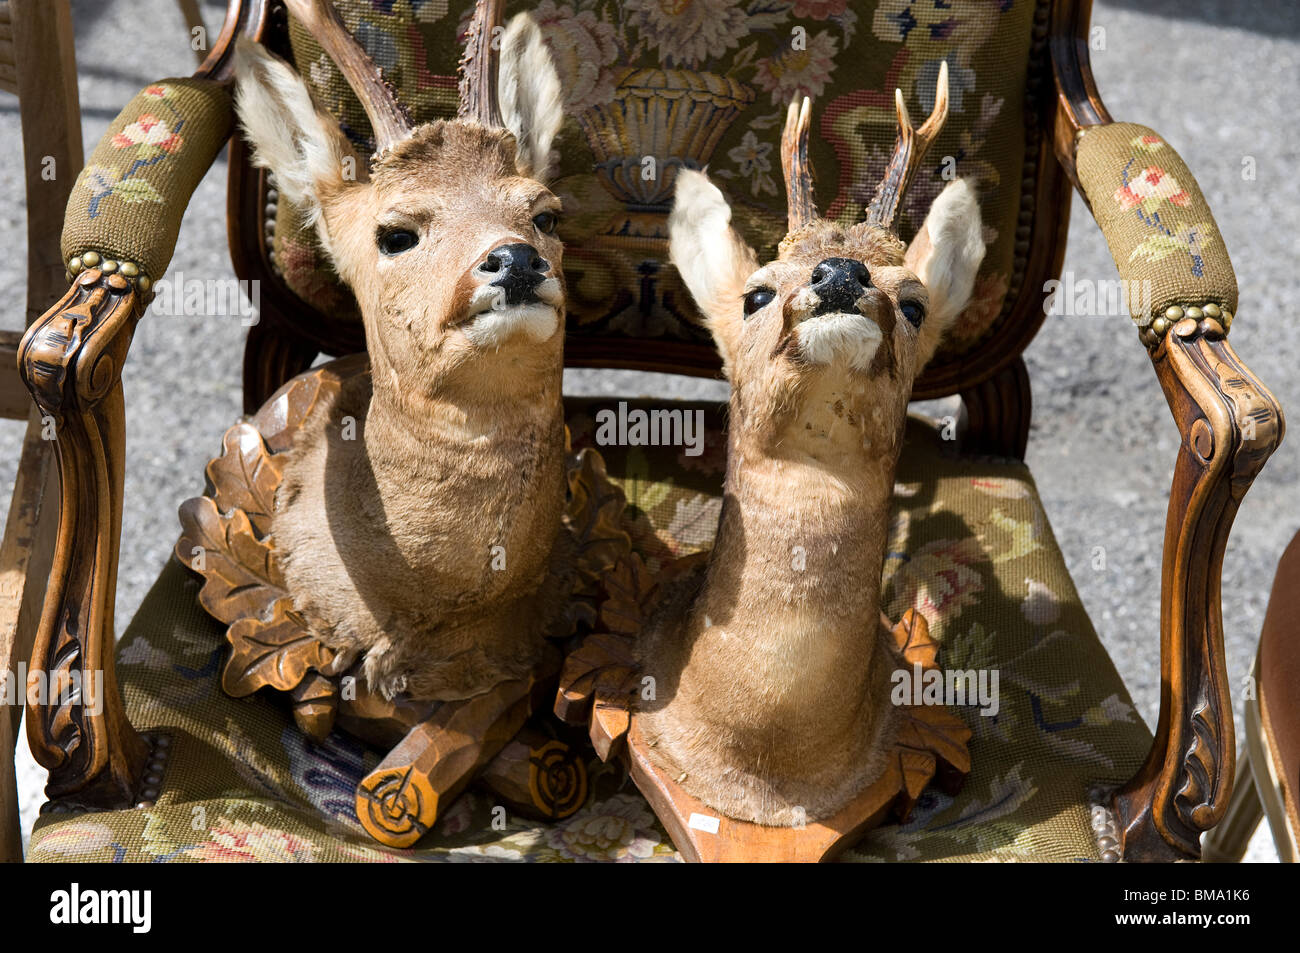 stuffed deer heads on chair in antiques market, locarno, switzerland Stock Photo